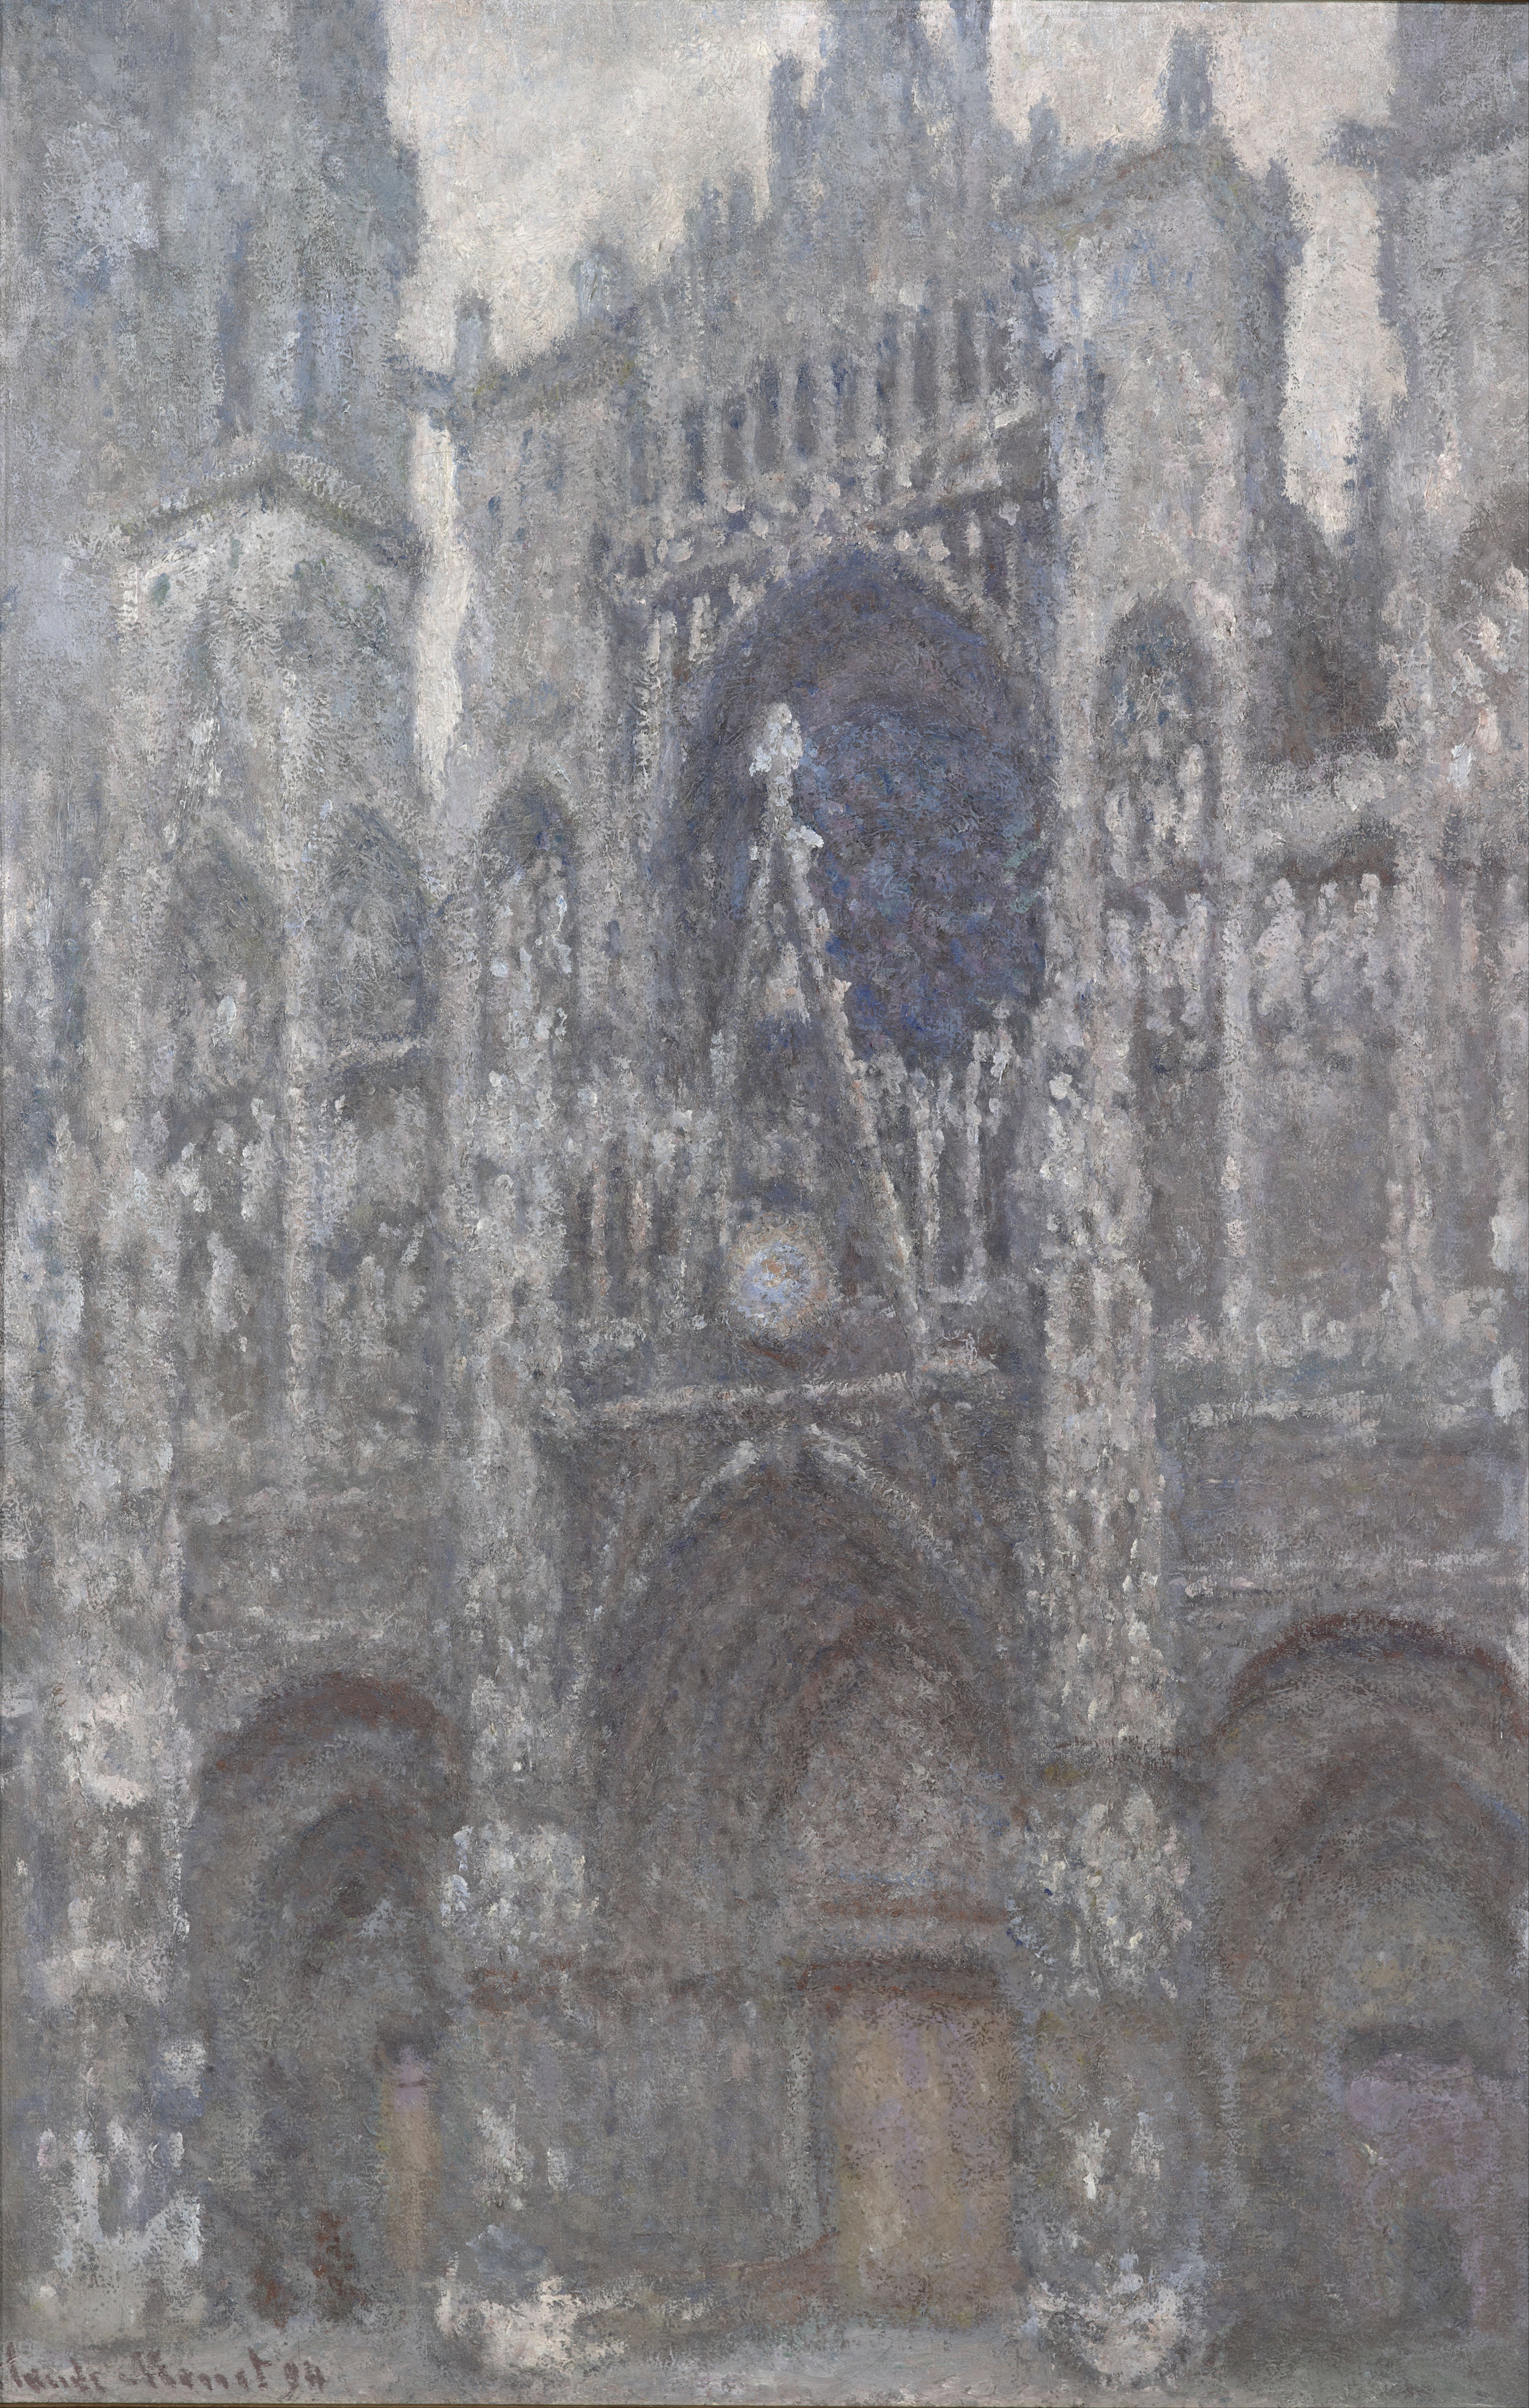 The Cathedral in Rouen. The portal, Grey Weather by Claude Monet - 1892 - 65 x 100 cm Musée d'Orsay